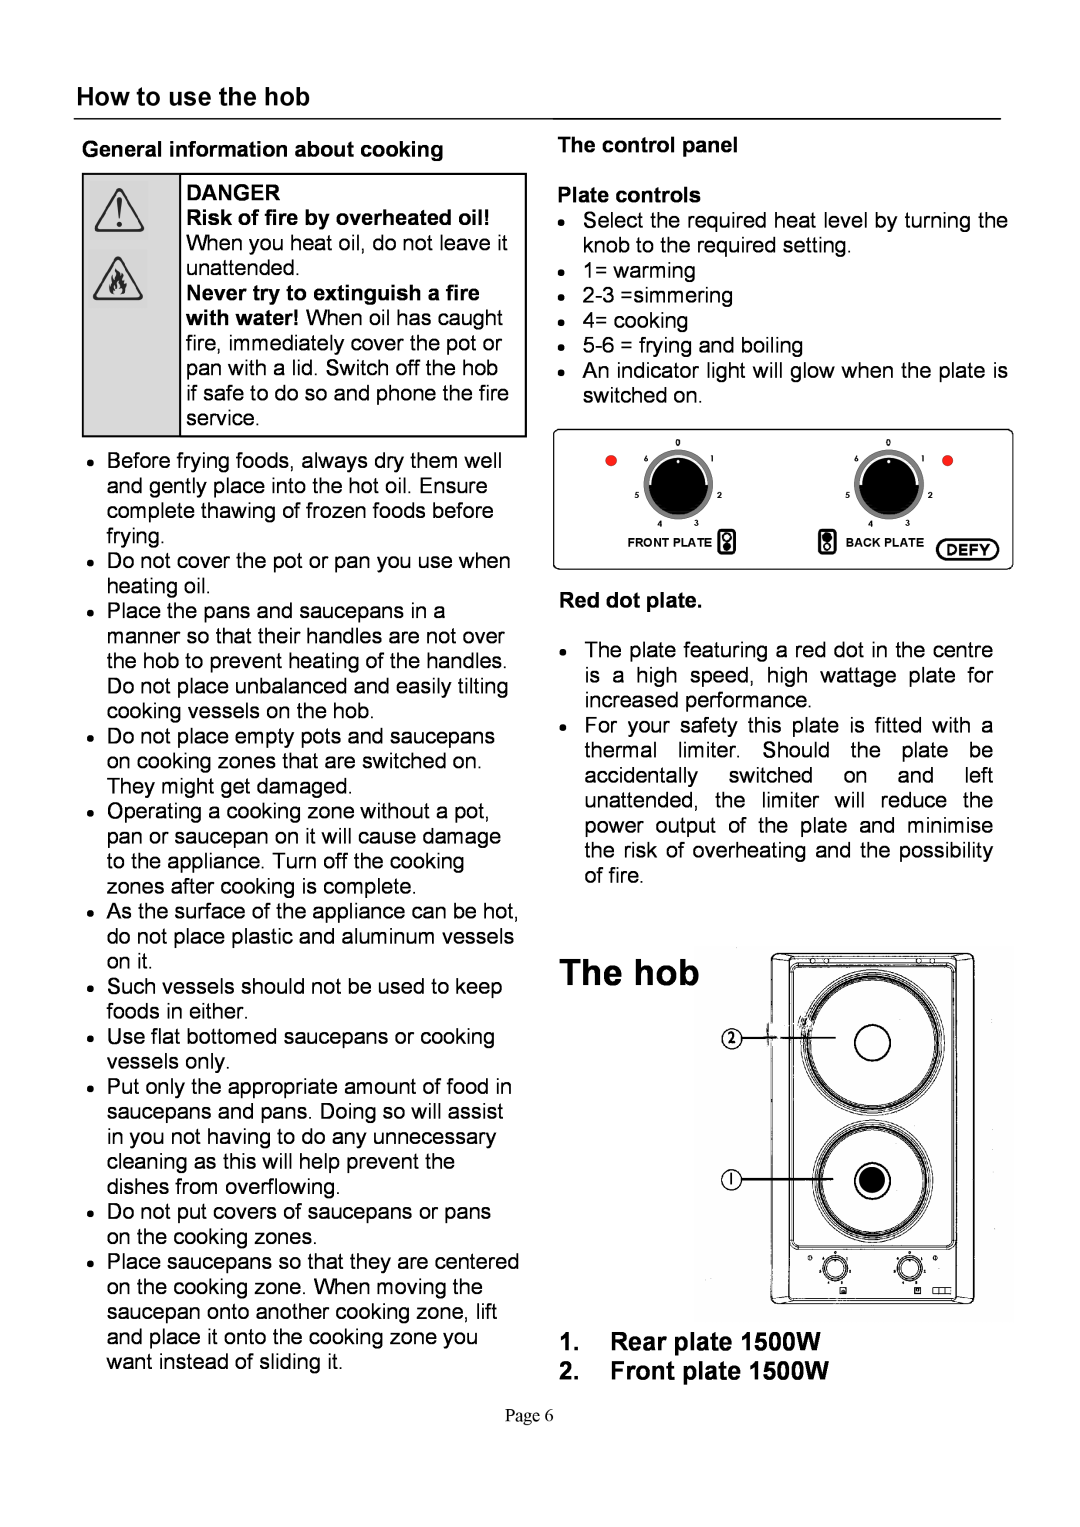 Defy Appliances DHD316 How to use the hob, Rear plate 1500W 2.Front plate 1500W, General information about cooking DANGER 